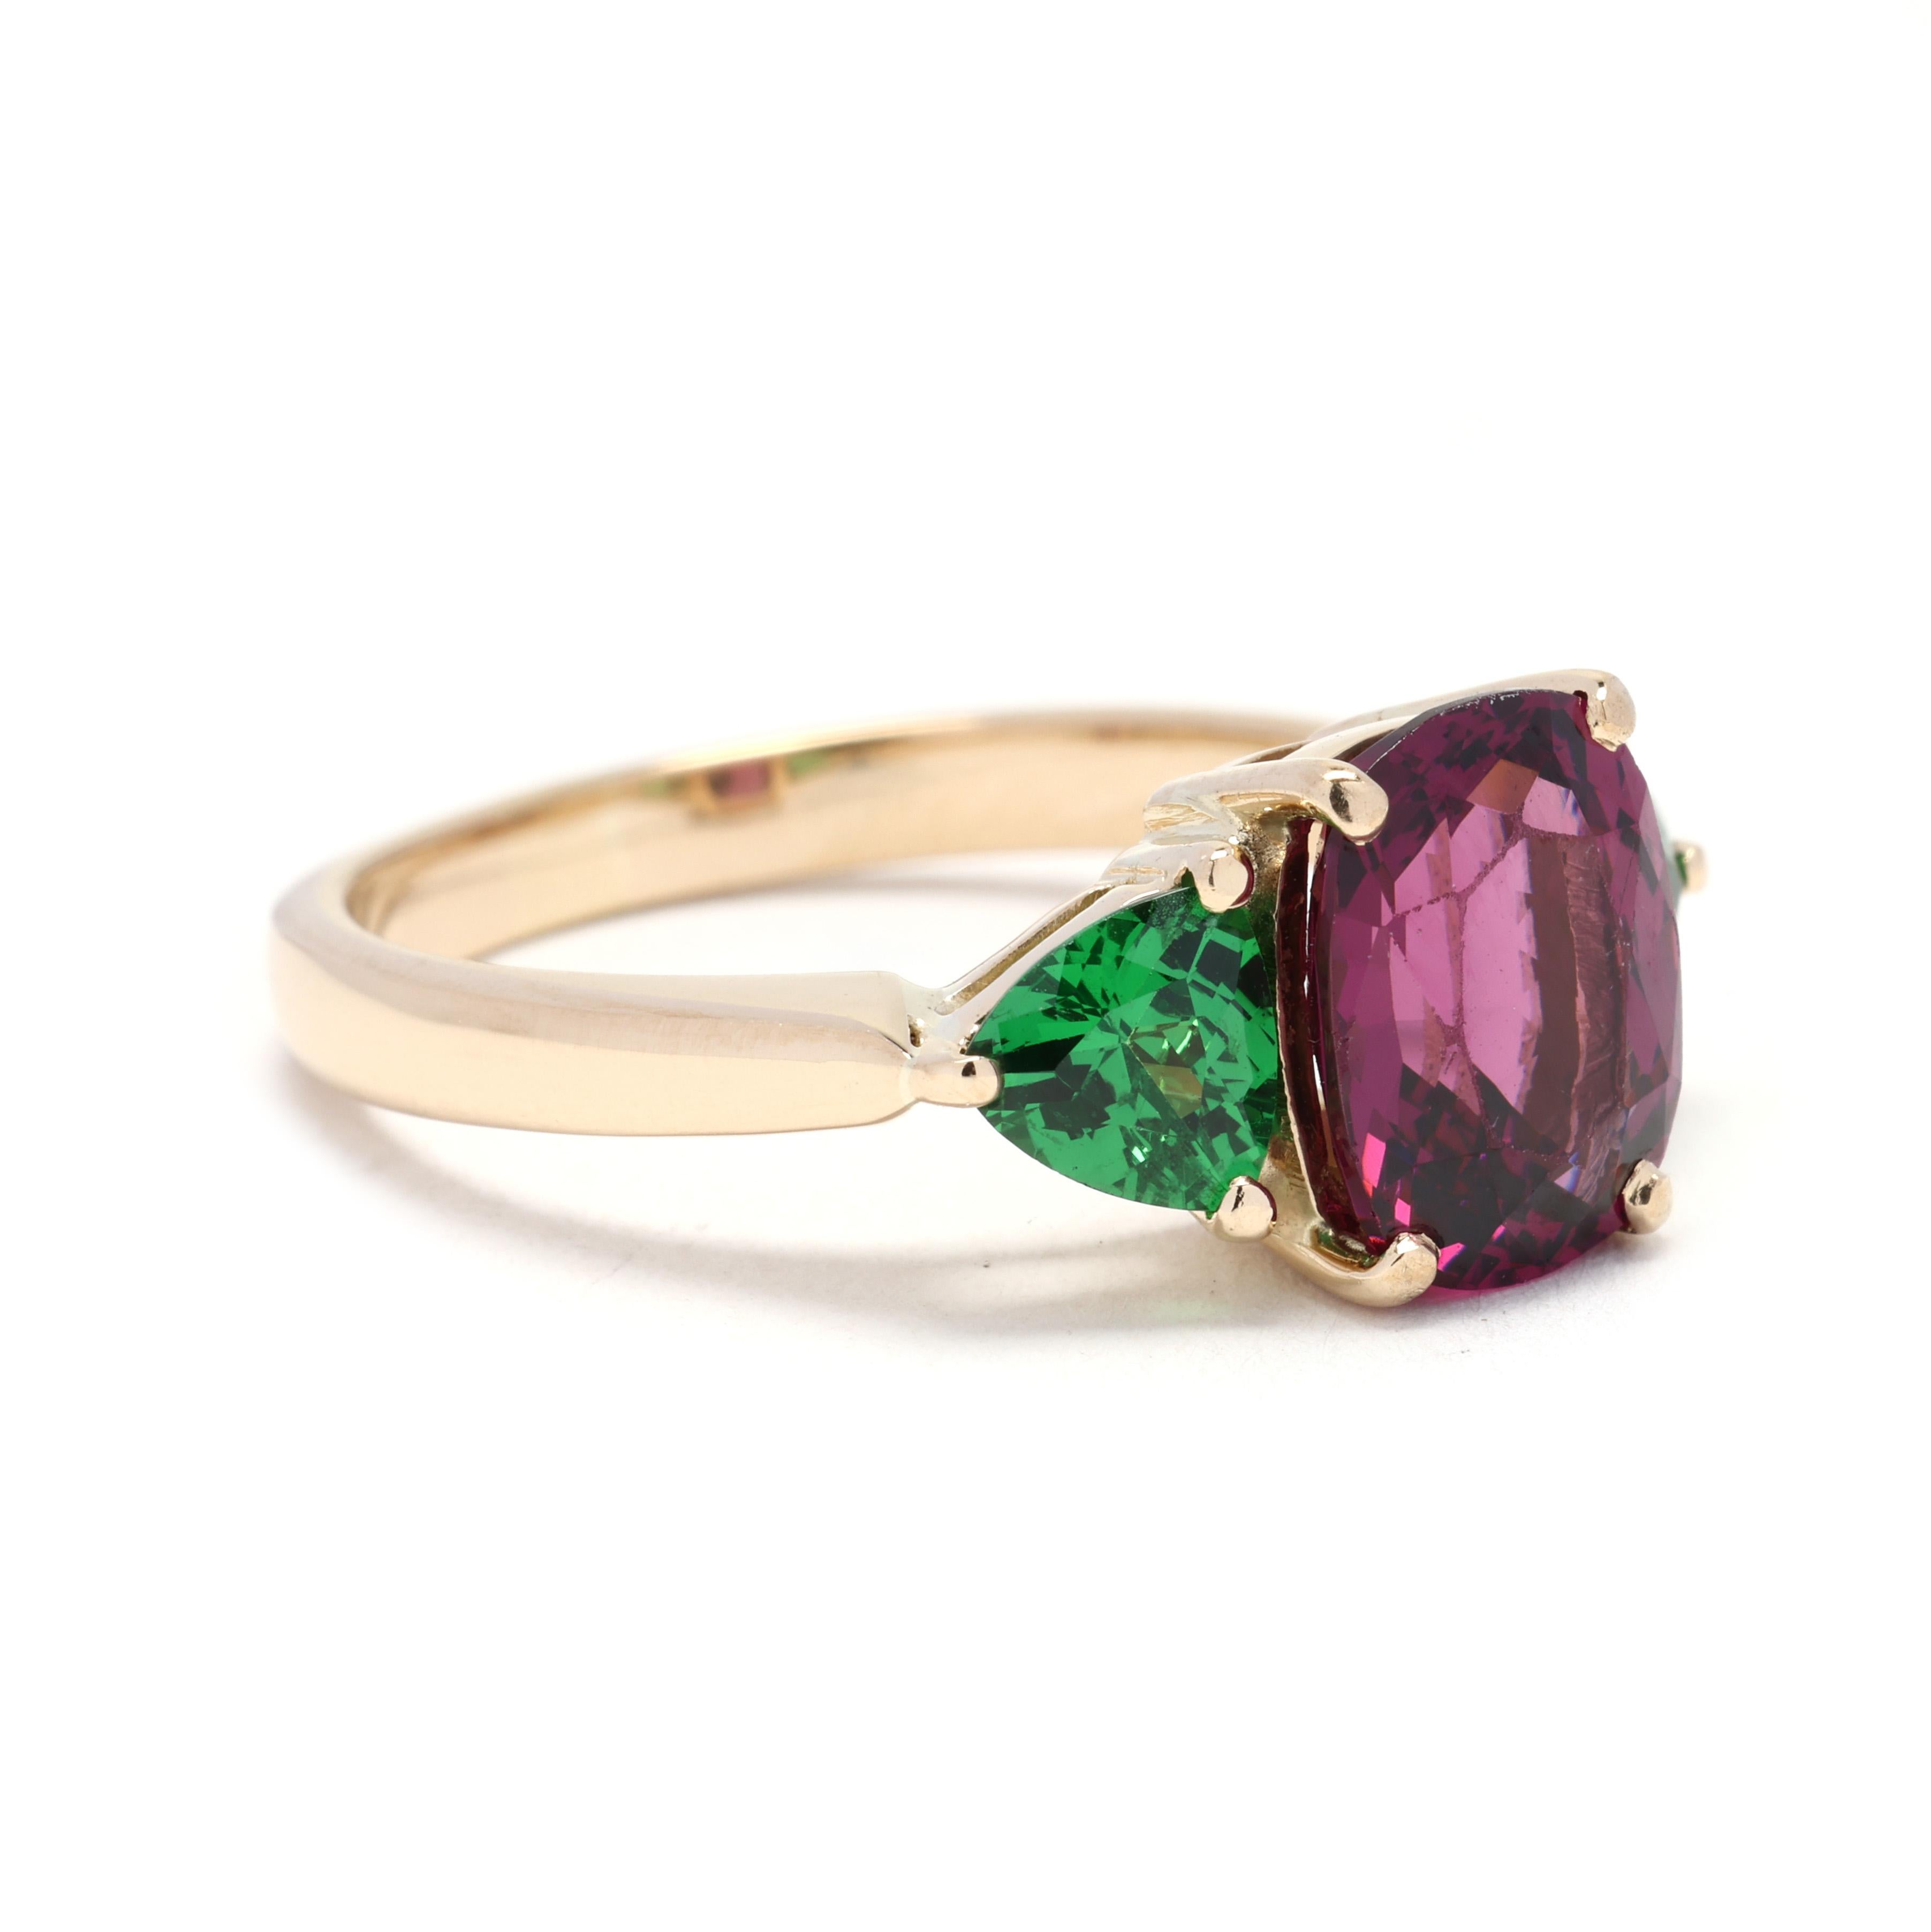 This 3.8ctw Rhodolite Garnet & Tsavorite Garnet Ring is a stunning and bold statement piece. Made from 18k yellow gold, this ring features a large oval-shaped Rhodolite Garnet center stone, surrounded by smaller round Tsavorite Garnet stones. The